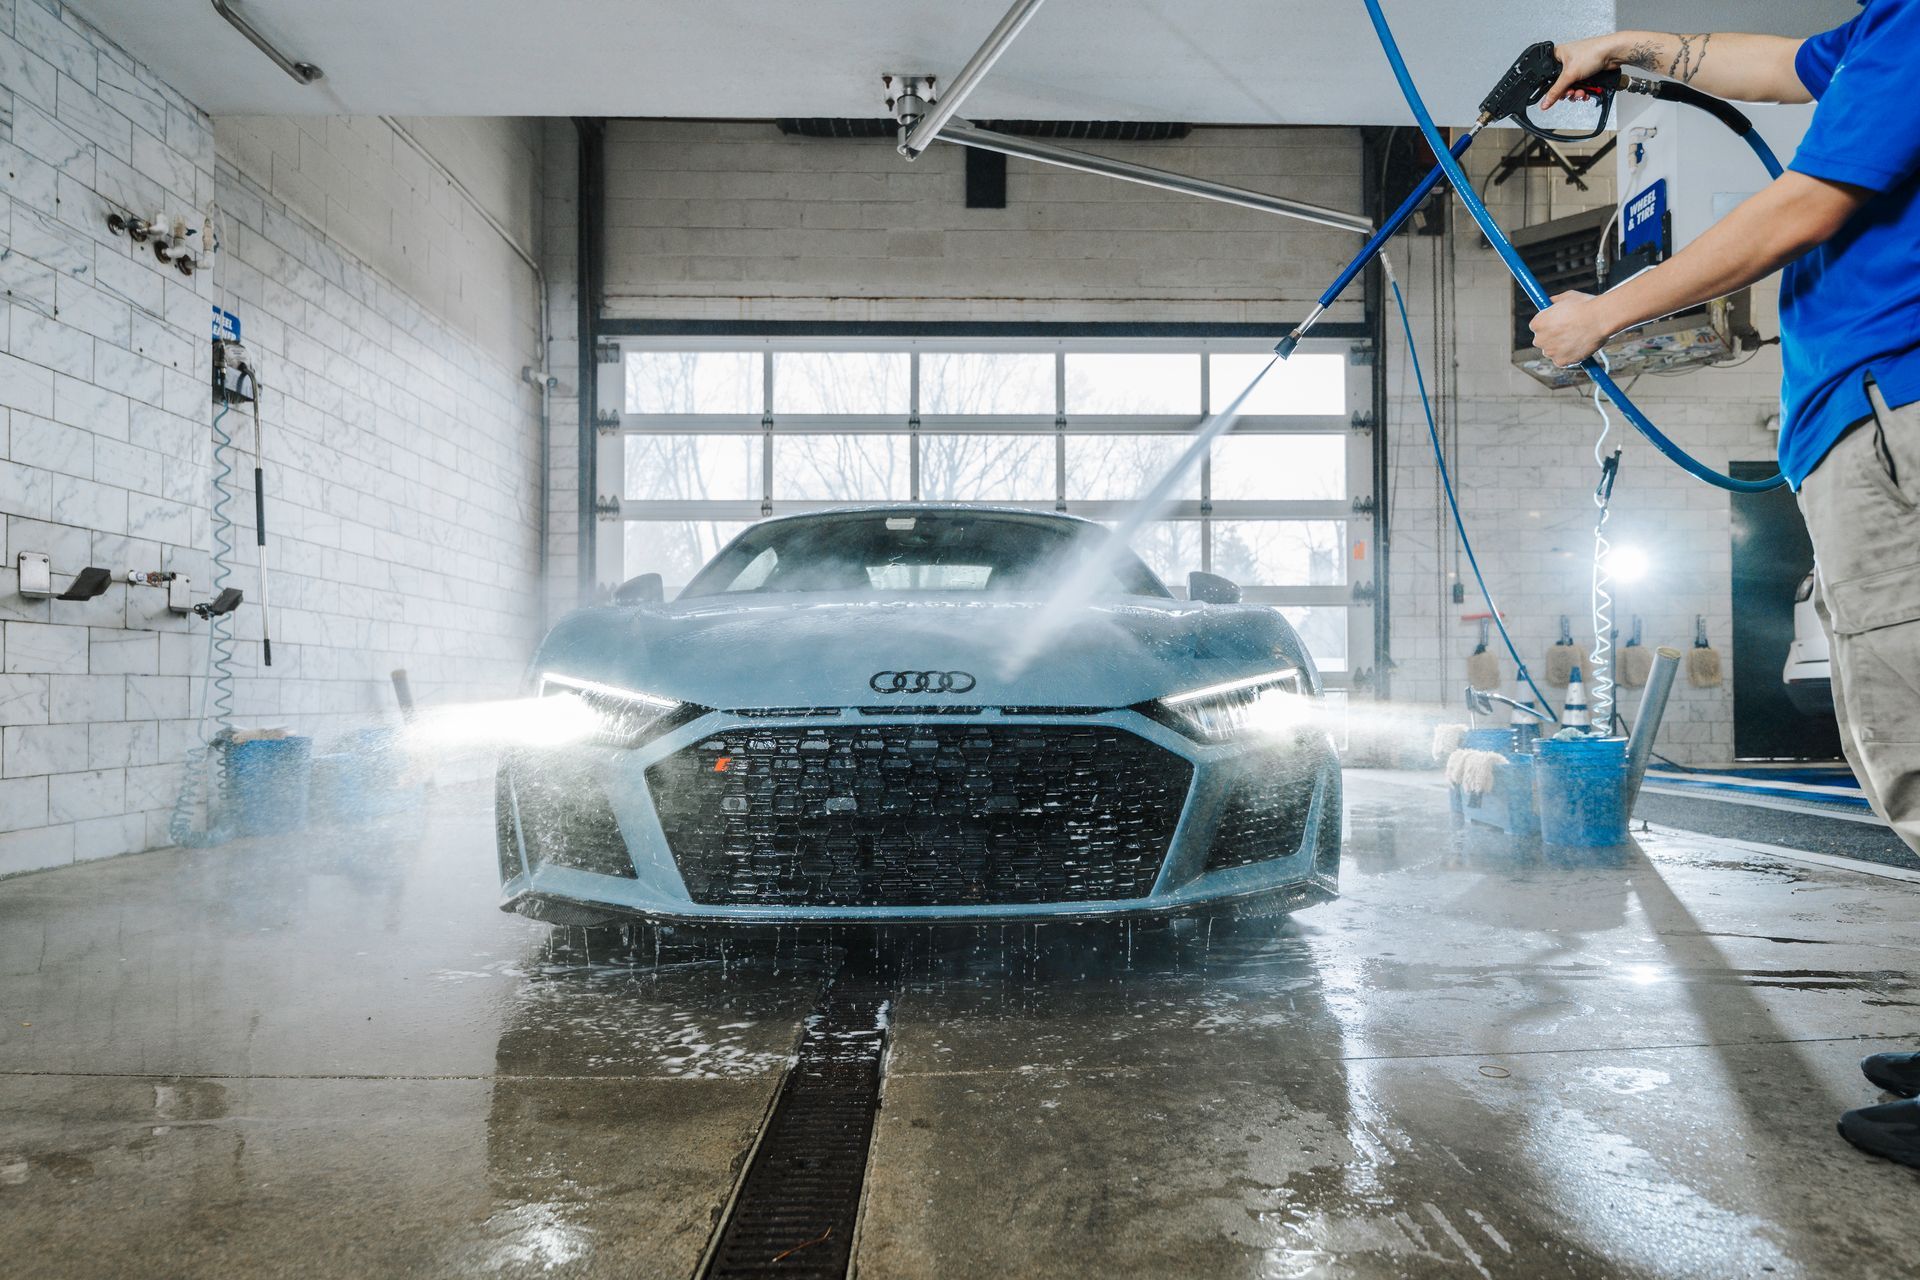 A man is washing a car in a garage with a high pressure washer.